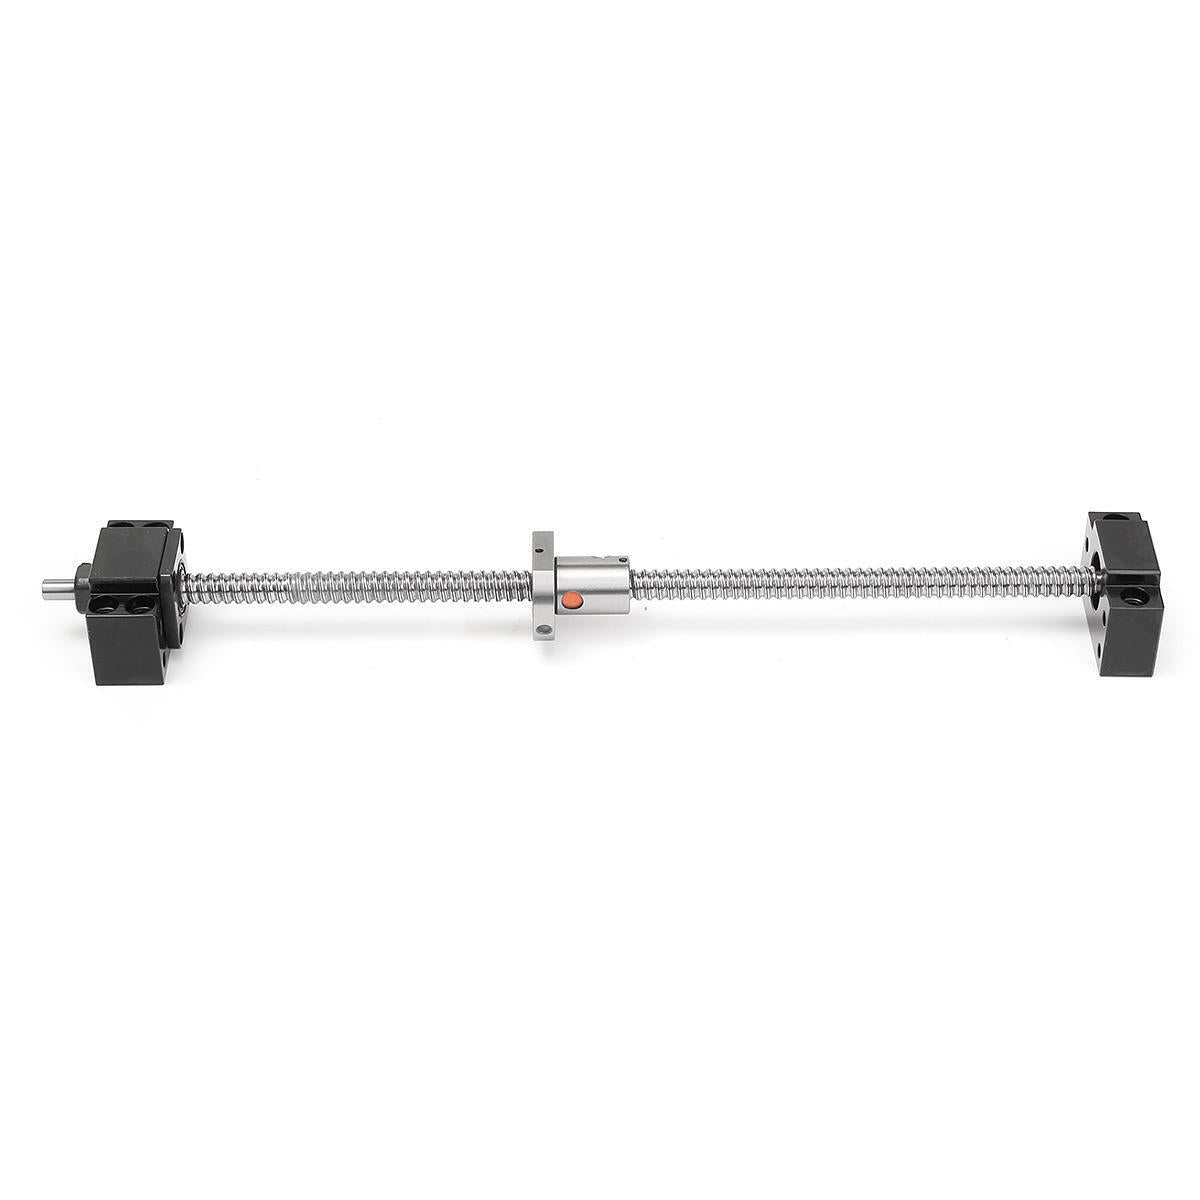 12mm SFU1204 Ball Screw Length 400mm With Ball Nut And BF/BK10 End Support